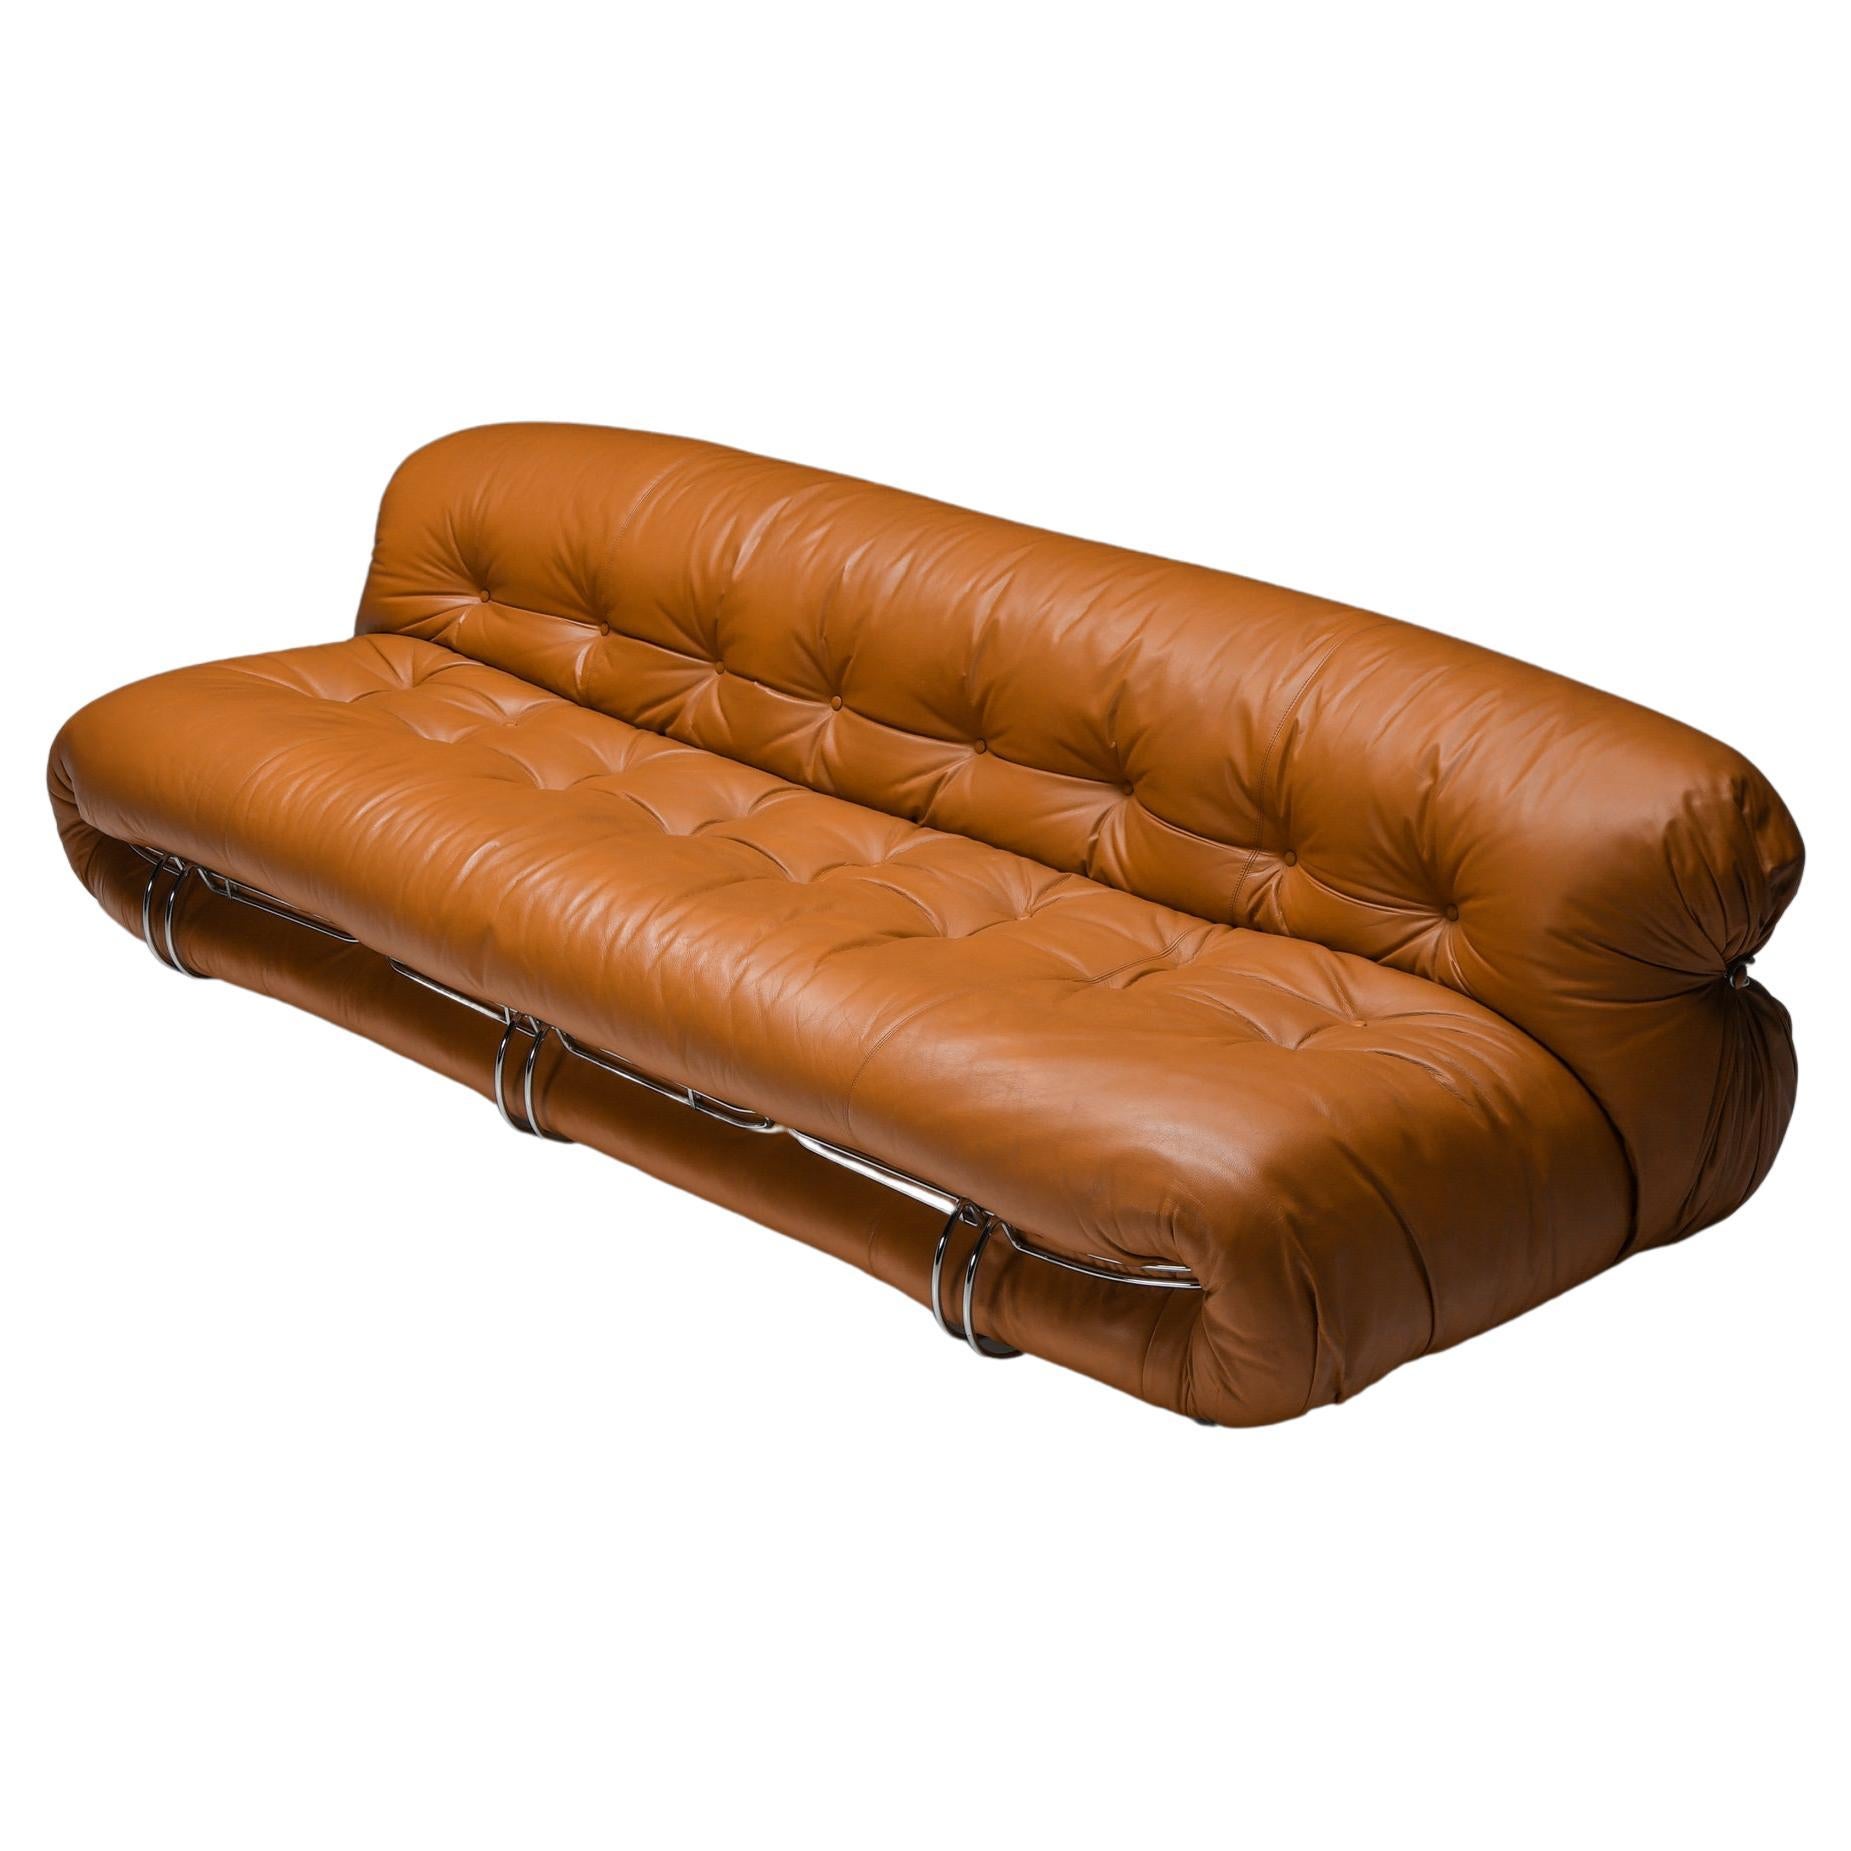 Post-Modern,Cassina 'Soriana' Cognac Leather Sofa by Afra and Tobia Scarpa, 1970